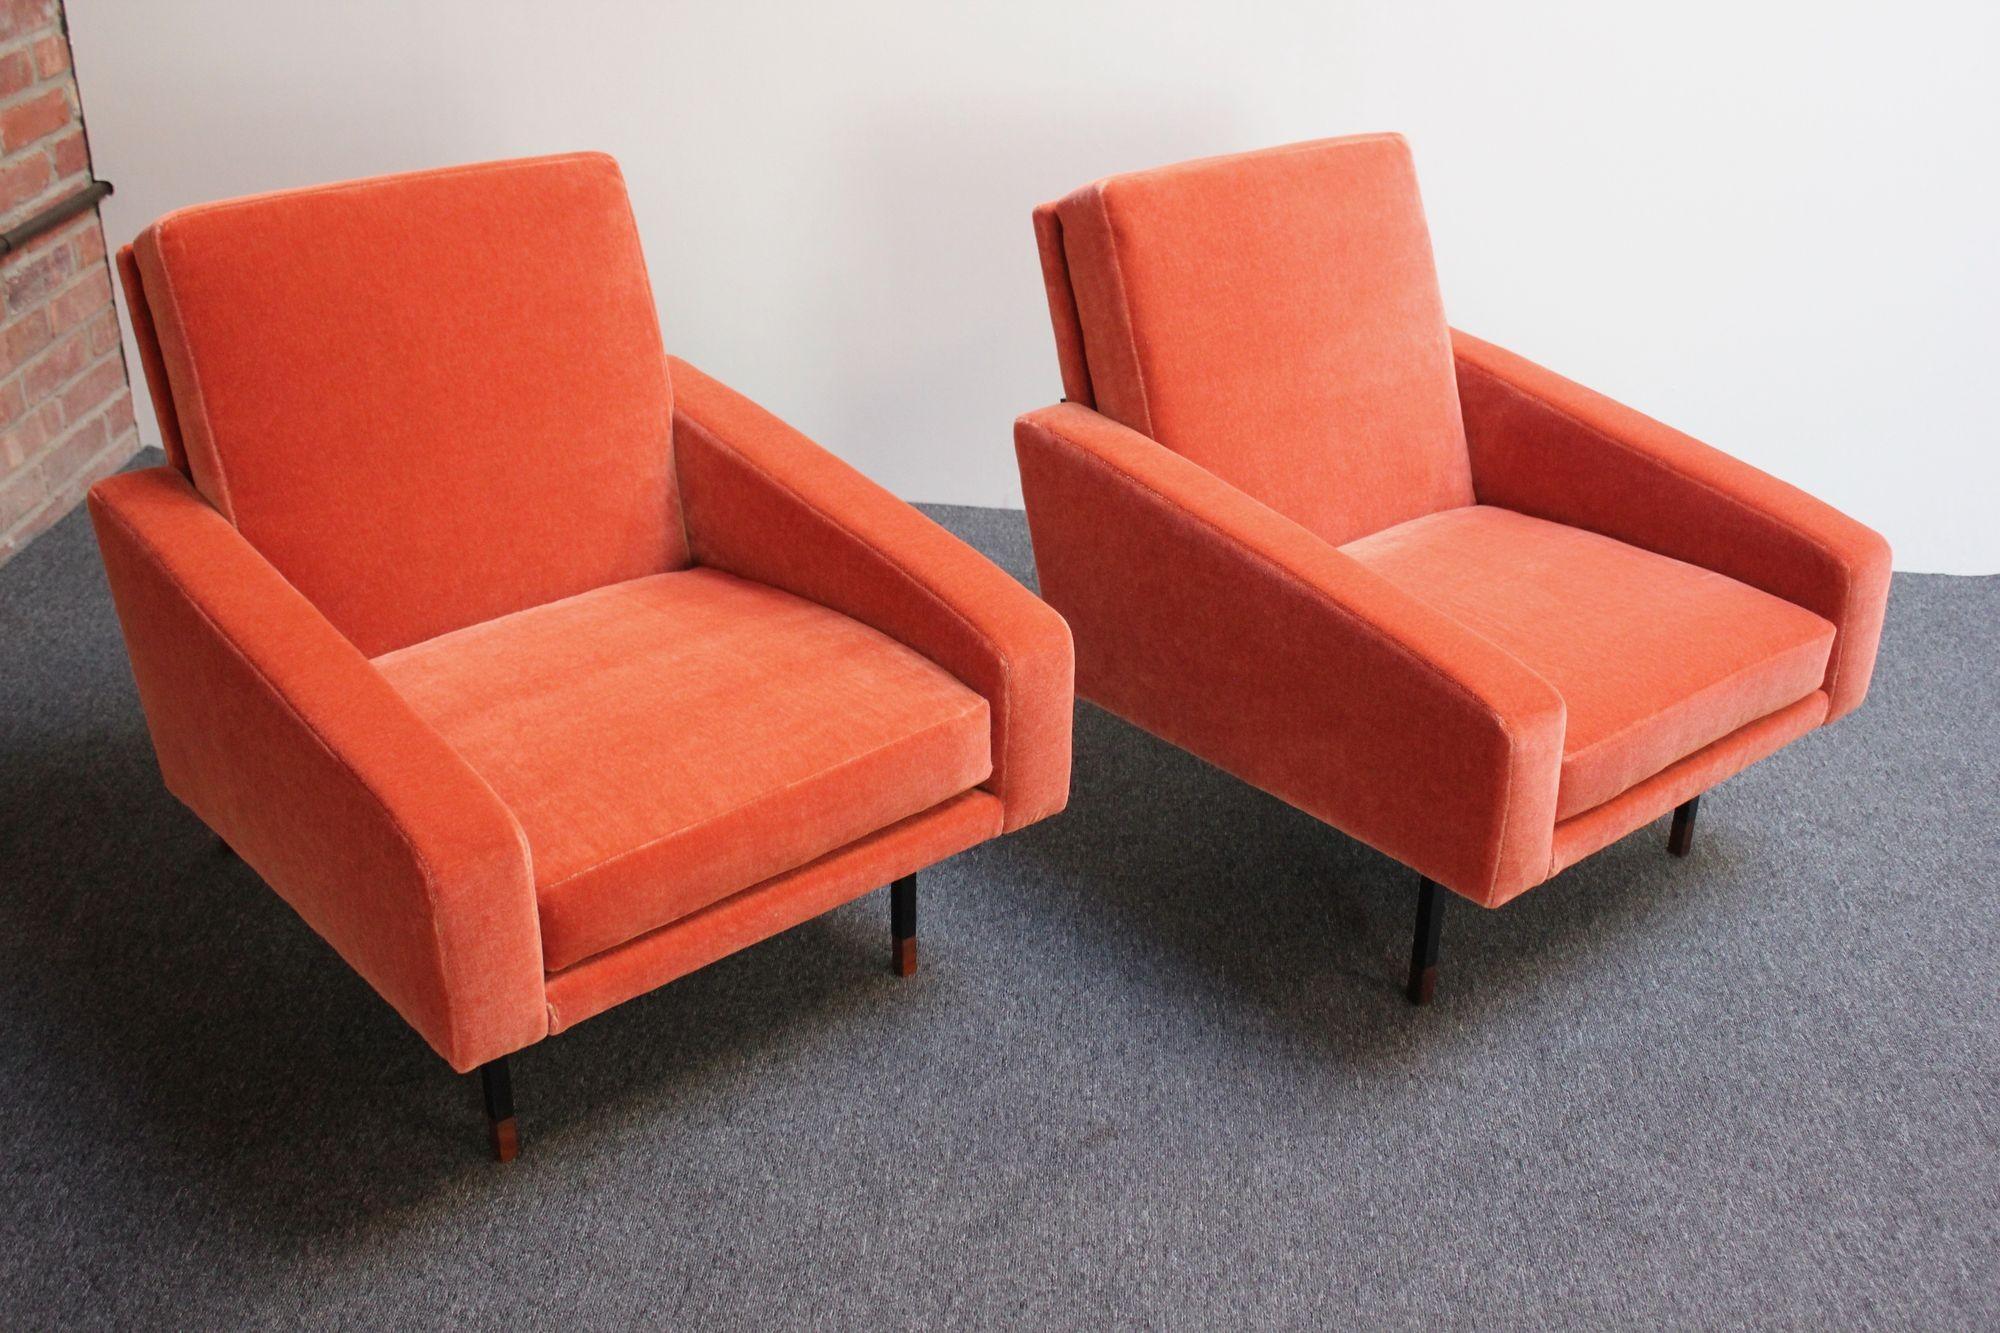 Pair of Italian Modernist Metal and Mohair Lounge Chairs by Campo and Graffi For Sale 7